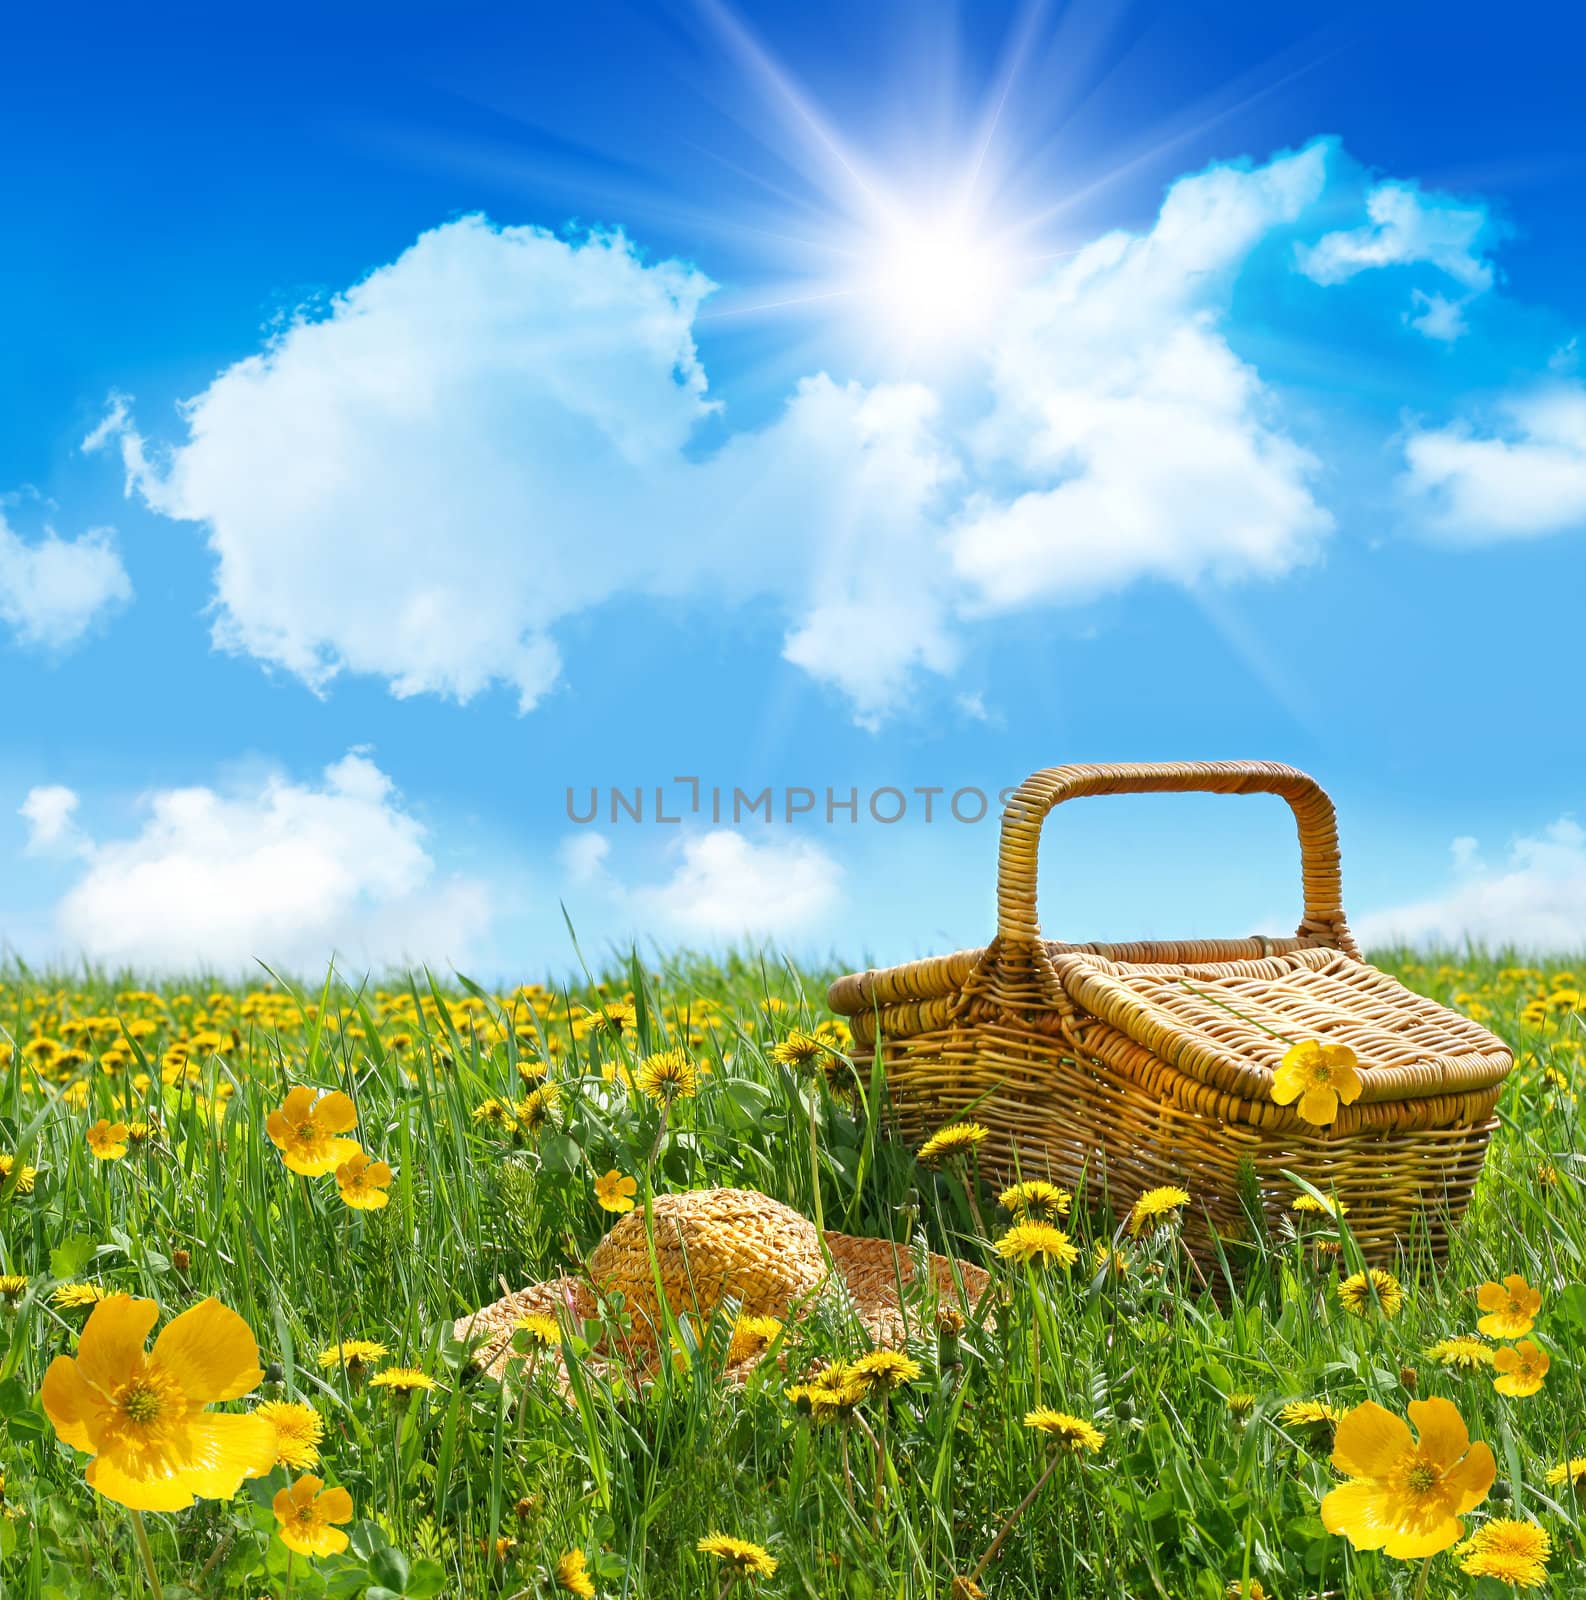 Summer picnic basket with straw hat in a field of dandelions